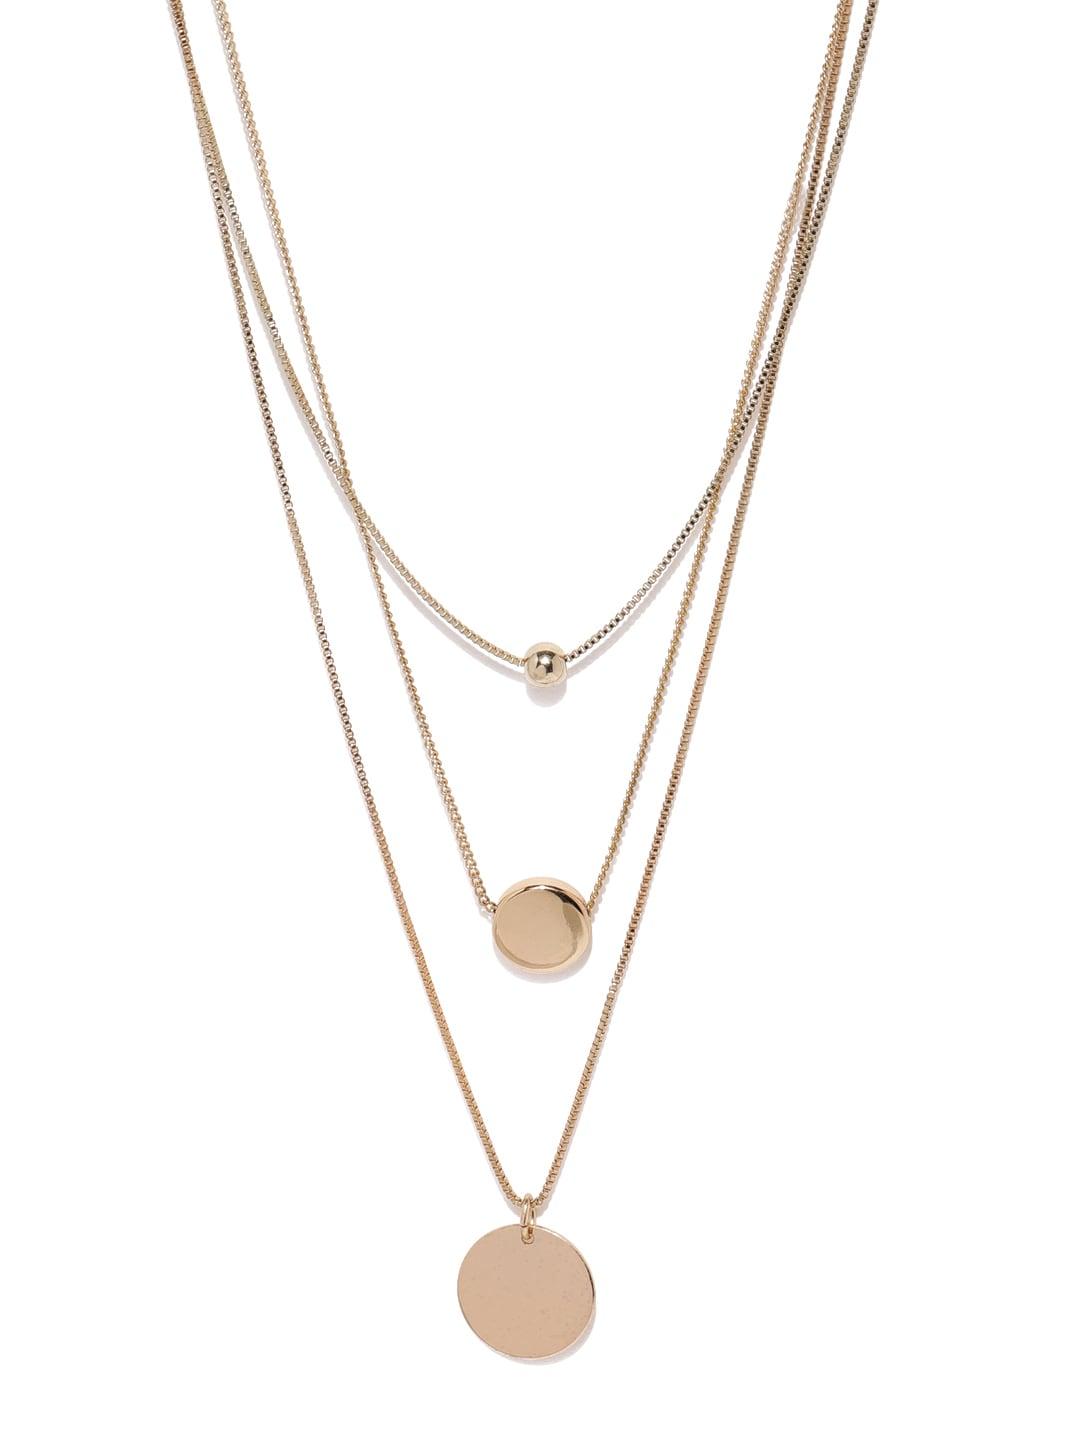 accessorize gold-toned layered necklace